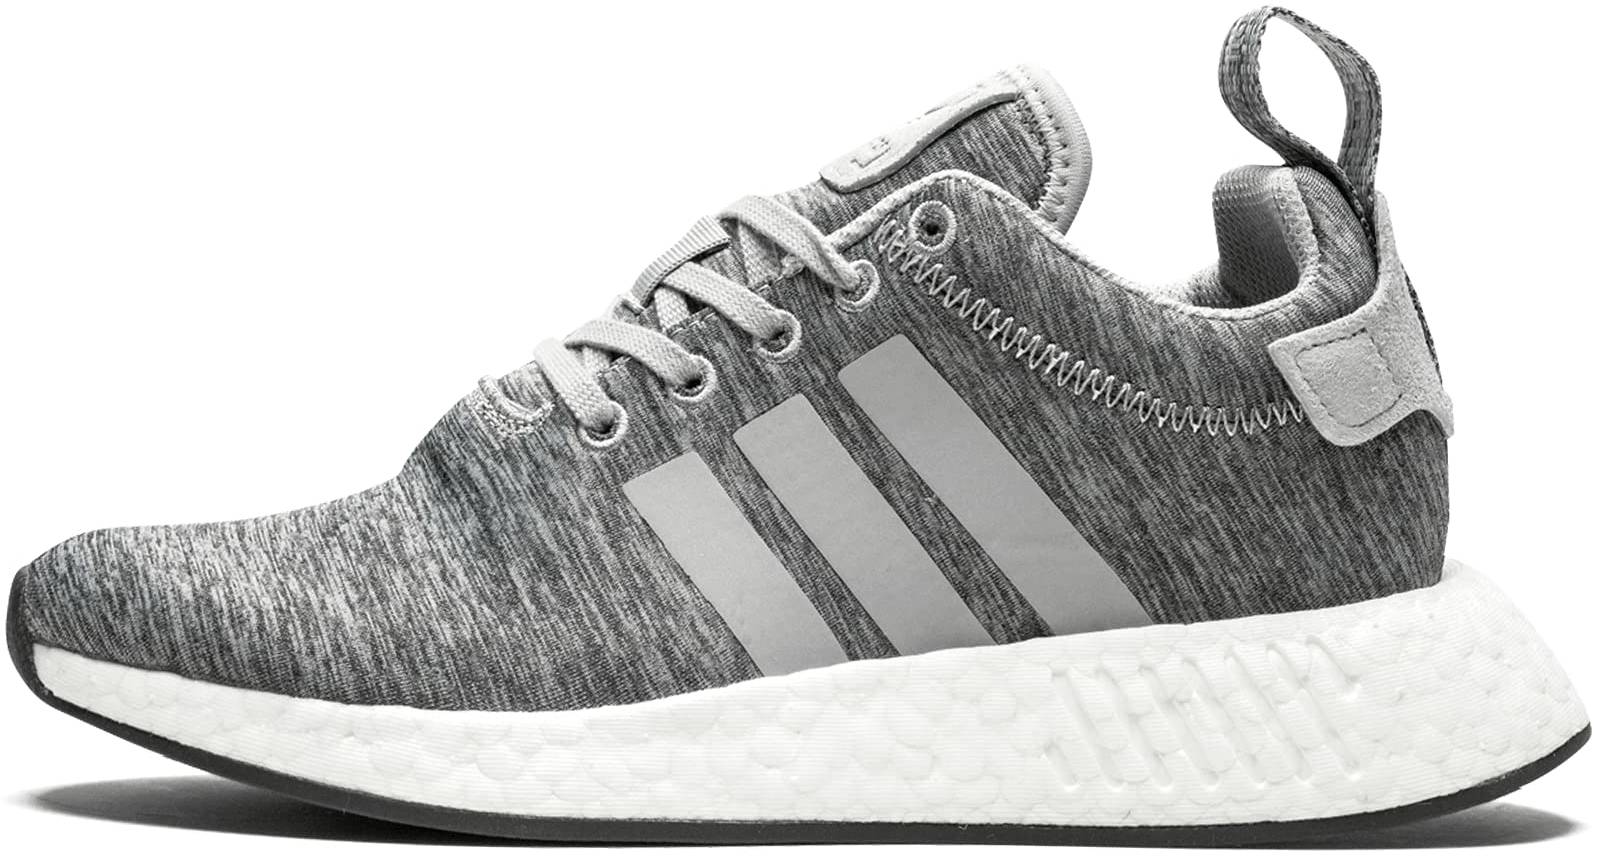 Adidas NMD R2 Men's Sz 9.5 Shoes Gray Ivory Athletic Low Top Trainer  Sneakers